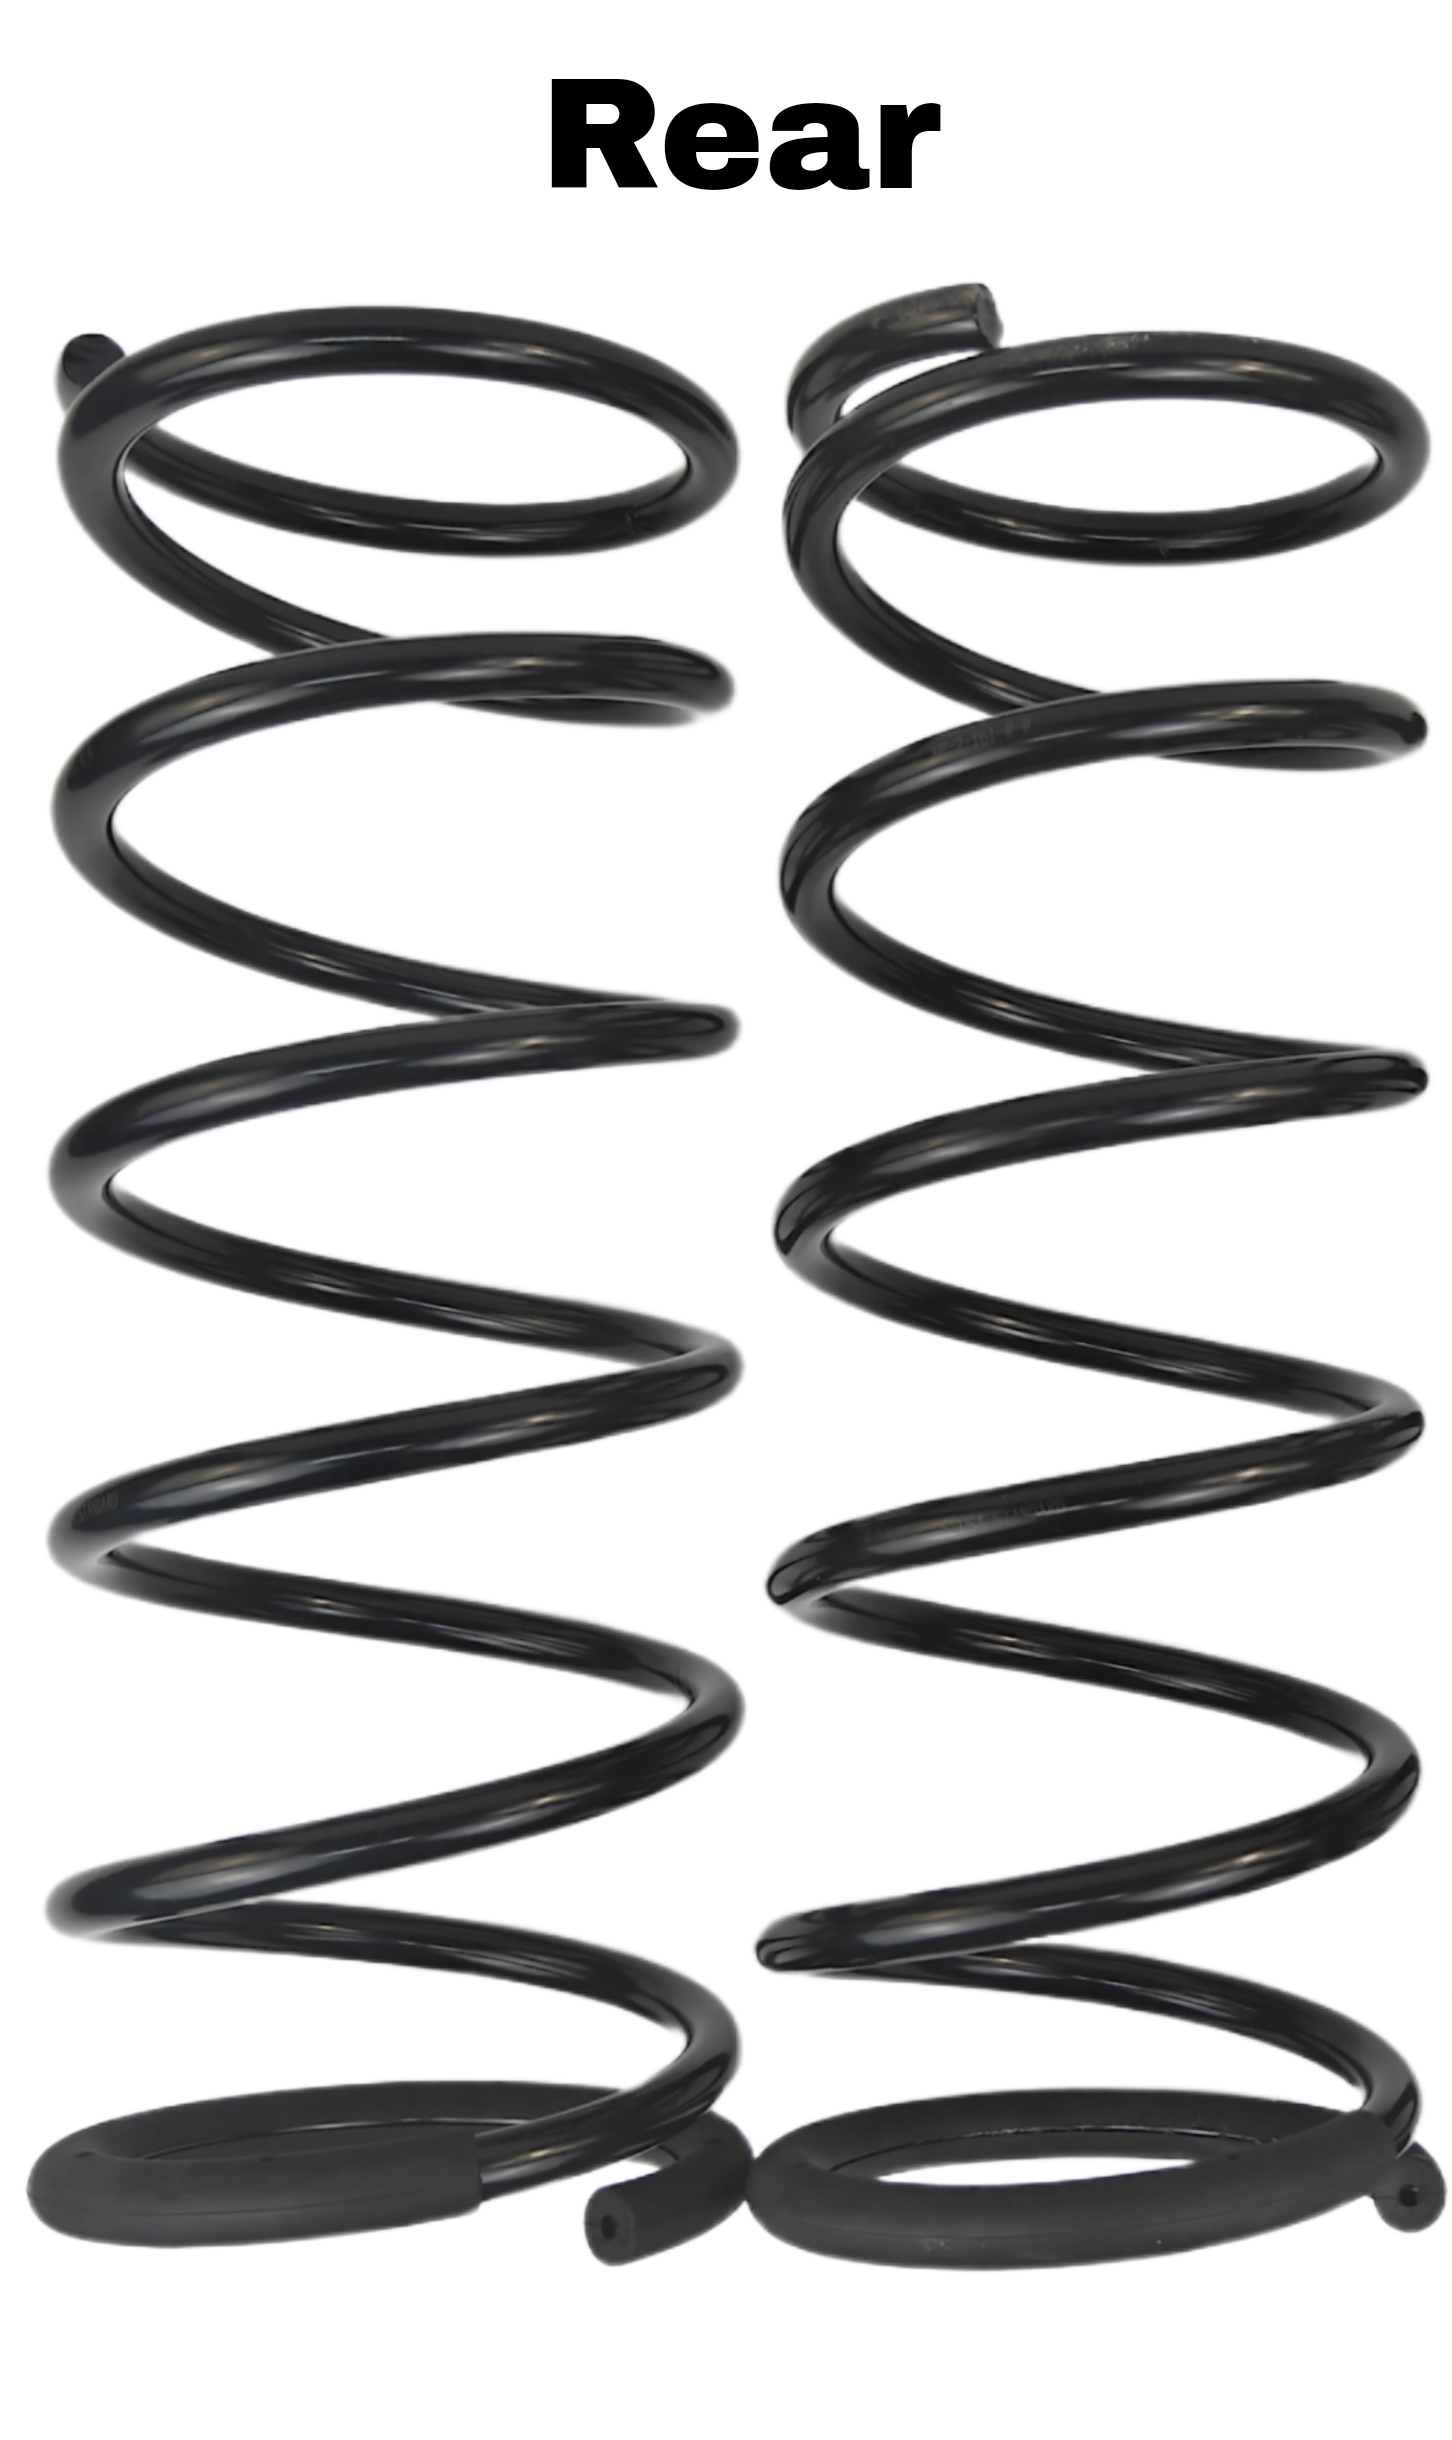 HURRICANE PERFORMANCE 2 INCH COIL SPRING SET (FRONT & REAR) FOR NISSAN Y61 - 2 DOOR